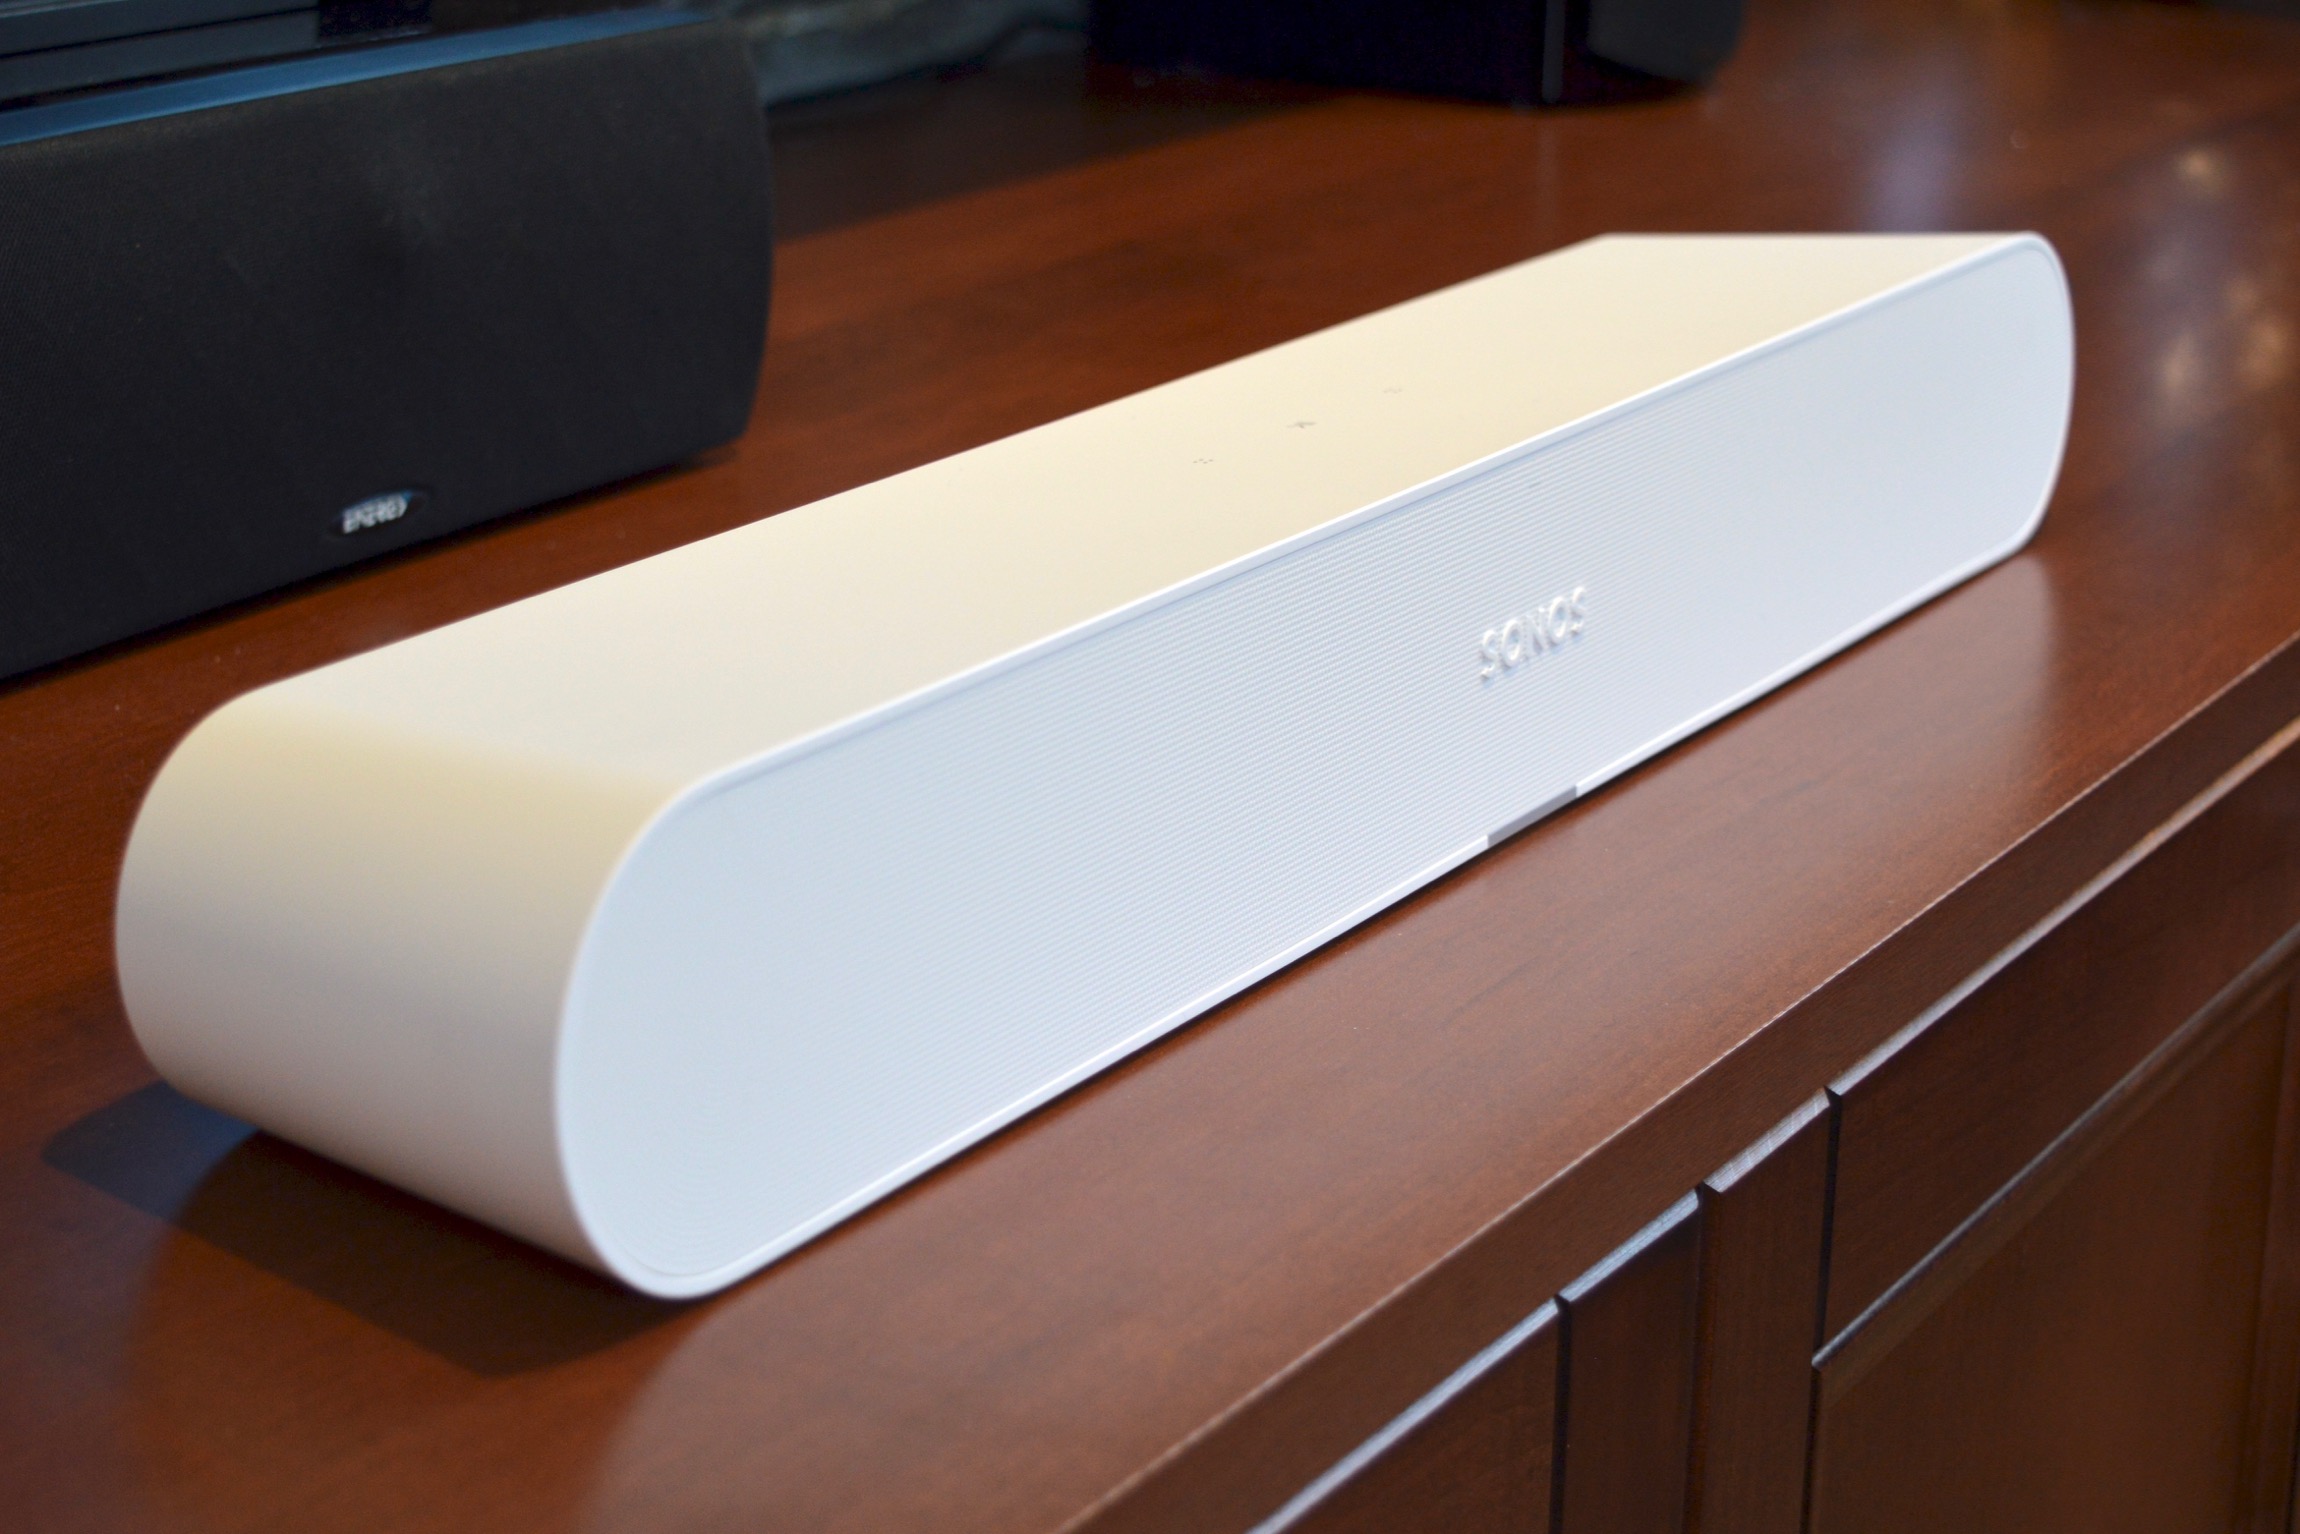 Sonos Ray Review: The start of something awesome